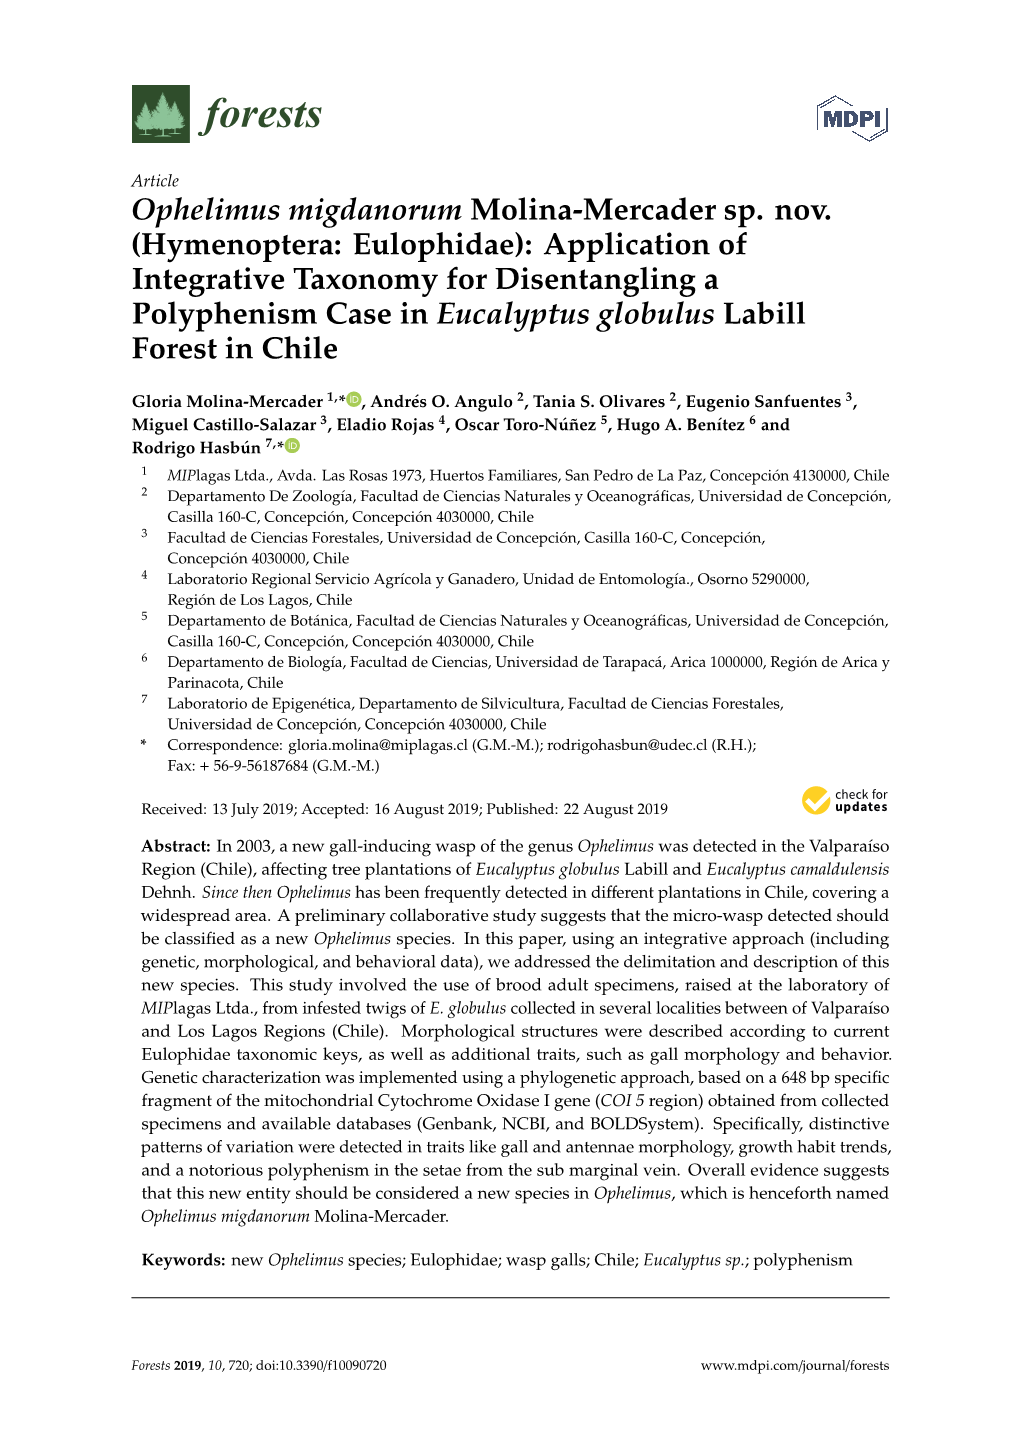 Hymenoptera: Eulophidae): Application of Integrative Taxonomy for Disentangling a Polyphenism Case in Eucalyptus Globulus Labill Forest in Chile